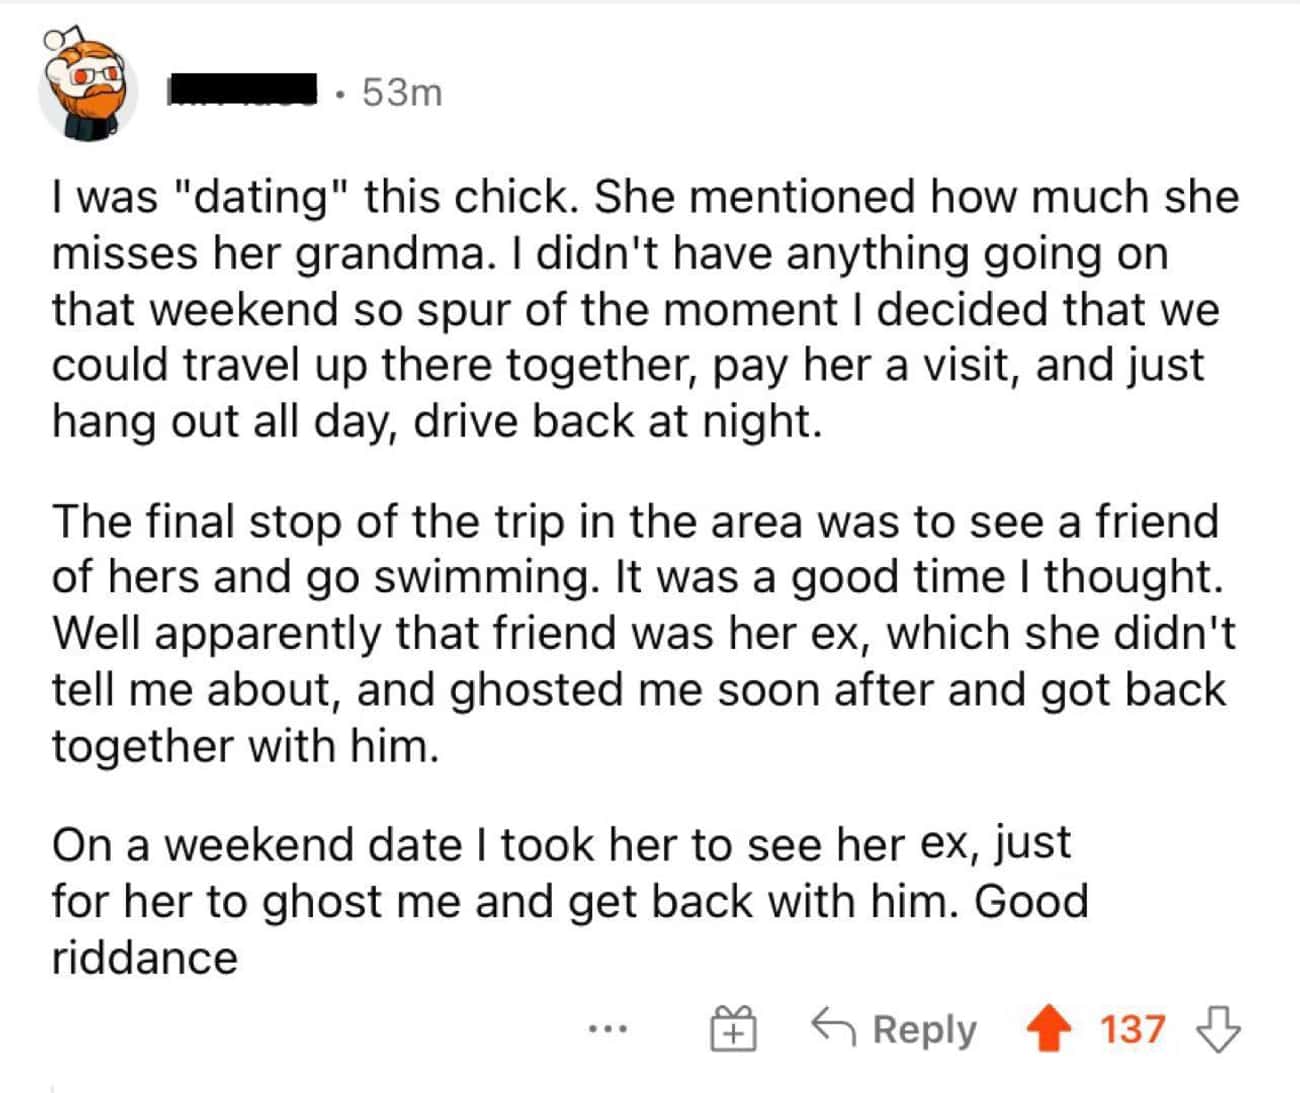 cringe posts - love you quotes - 53m I was "dating" this chick. She mentioned how much she misses her grandma. I didn't have anything going on that weekend so spur of the moment I decided that we could travel up there together, pay her a visit, and just h